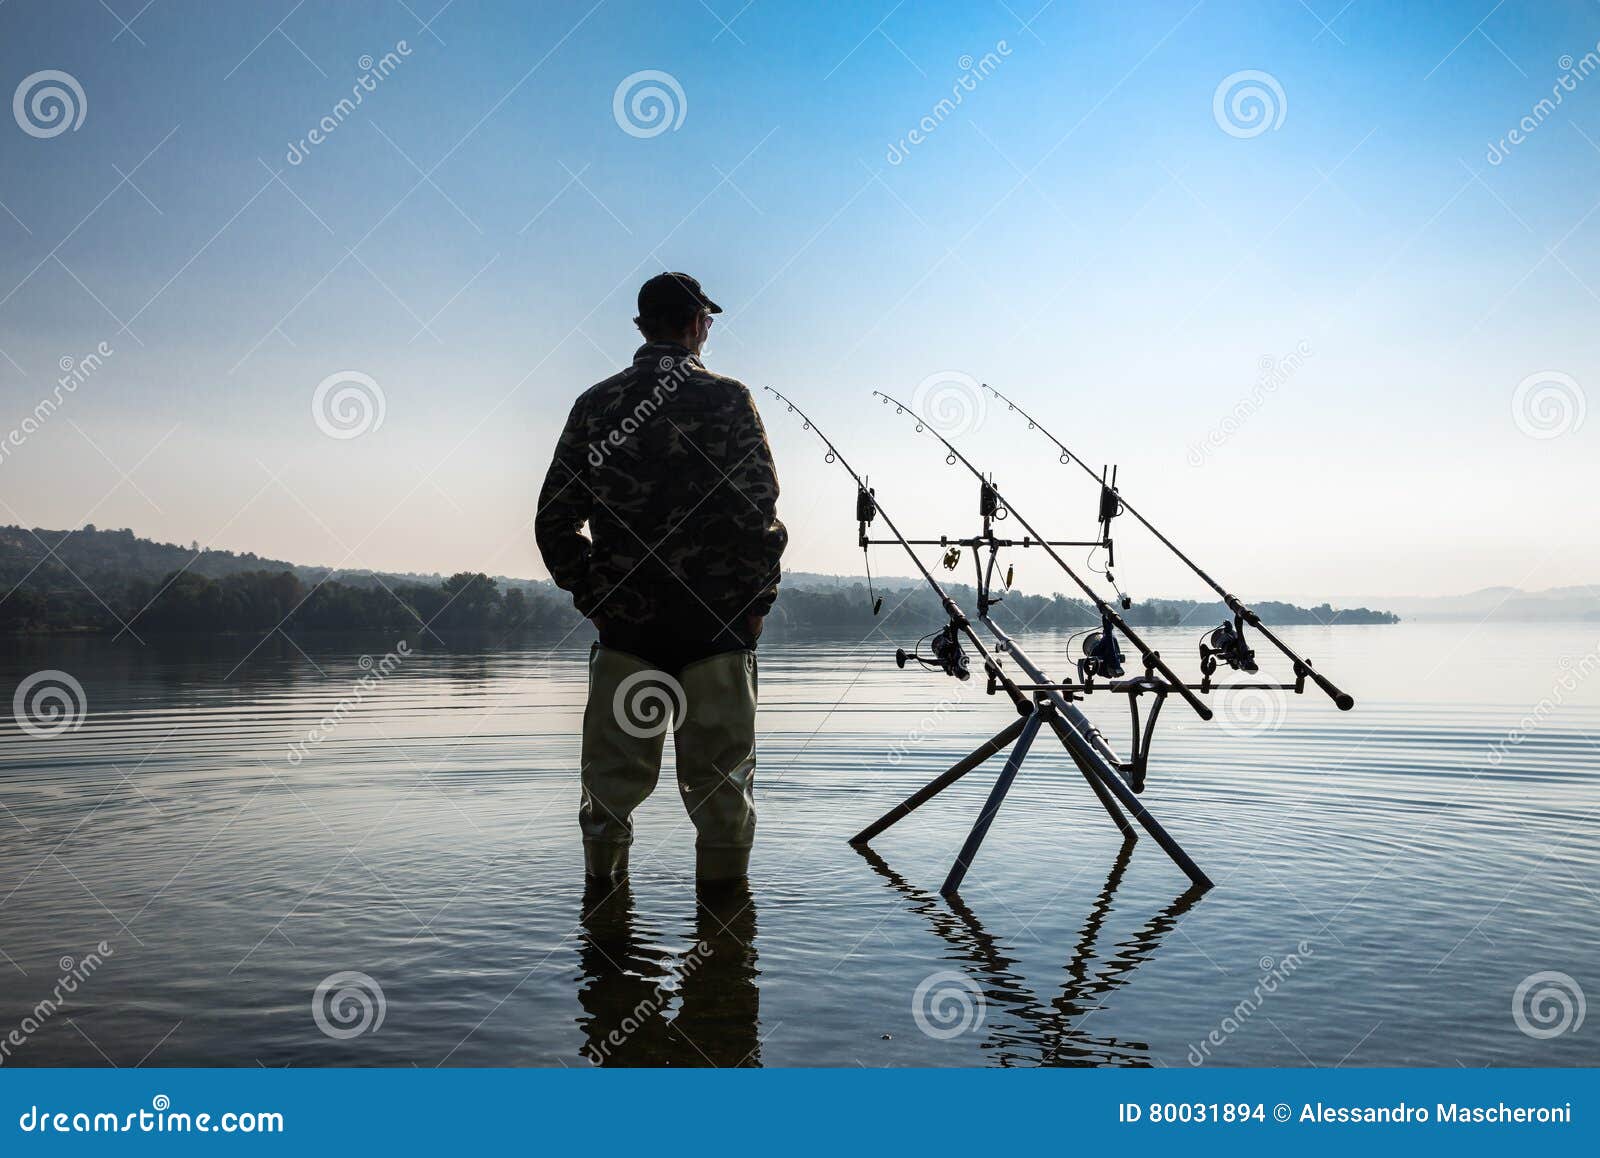 Fishing Adventures. Fisherman Waiting To Catch a Fish with Carp Fishing  Technique Stock Photo - Image of waders, fisher: 80031894